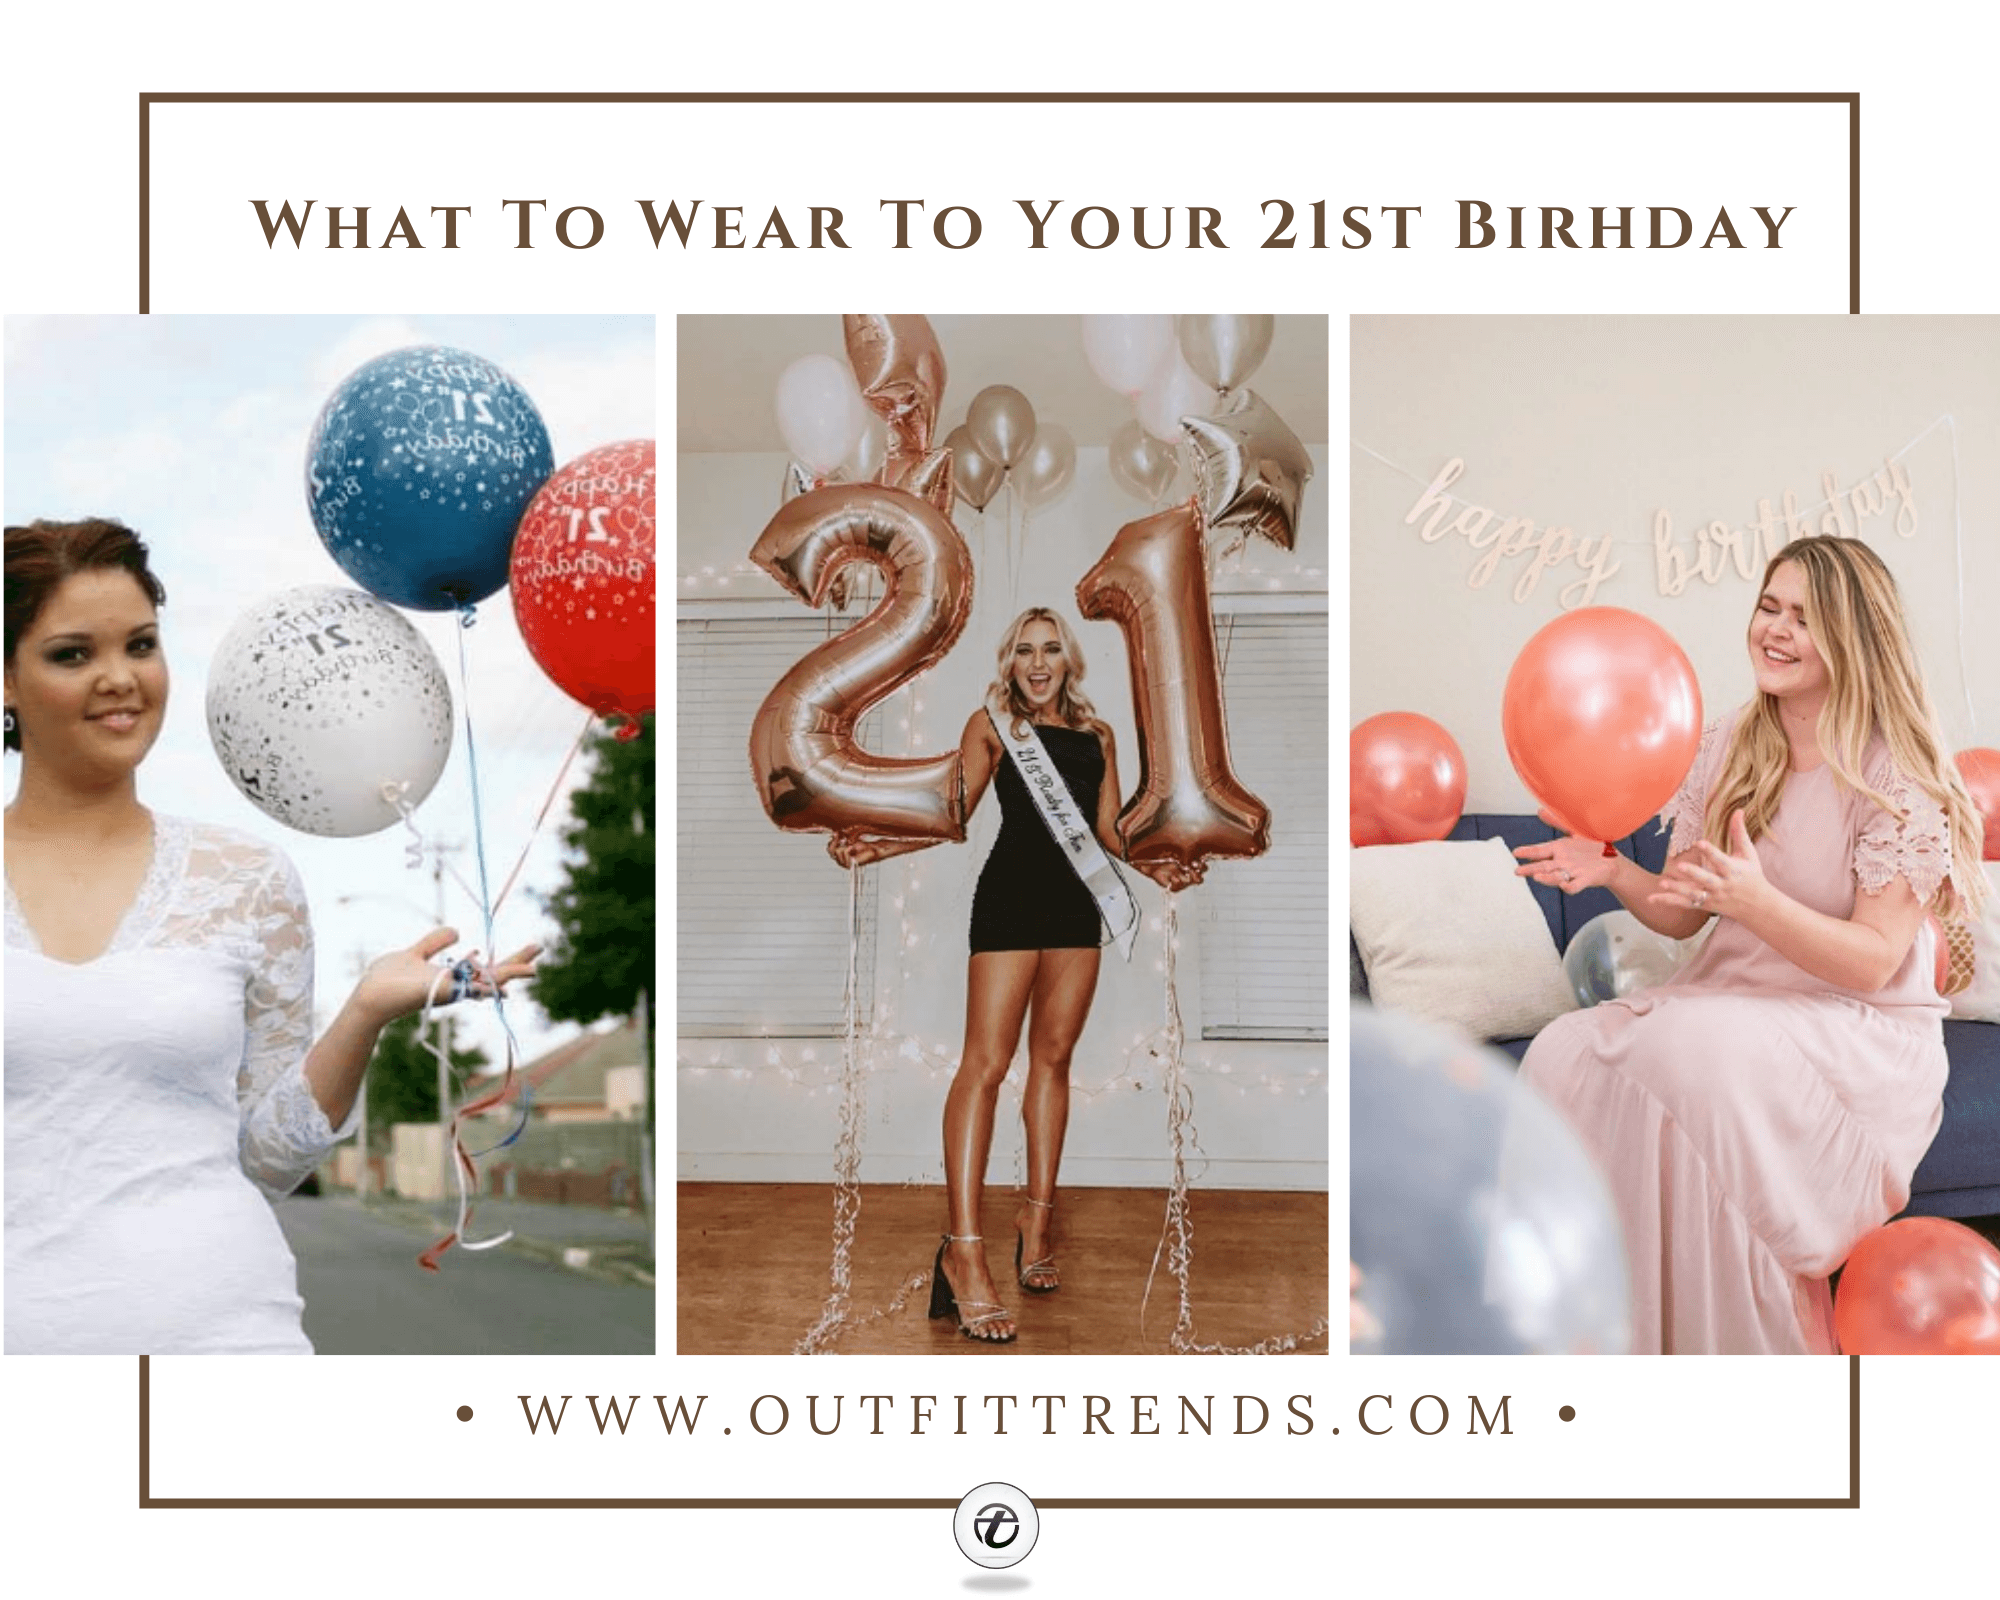 21st Birthday Outfits -15 Dress Ideas for Your 21st Birthday Party